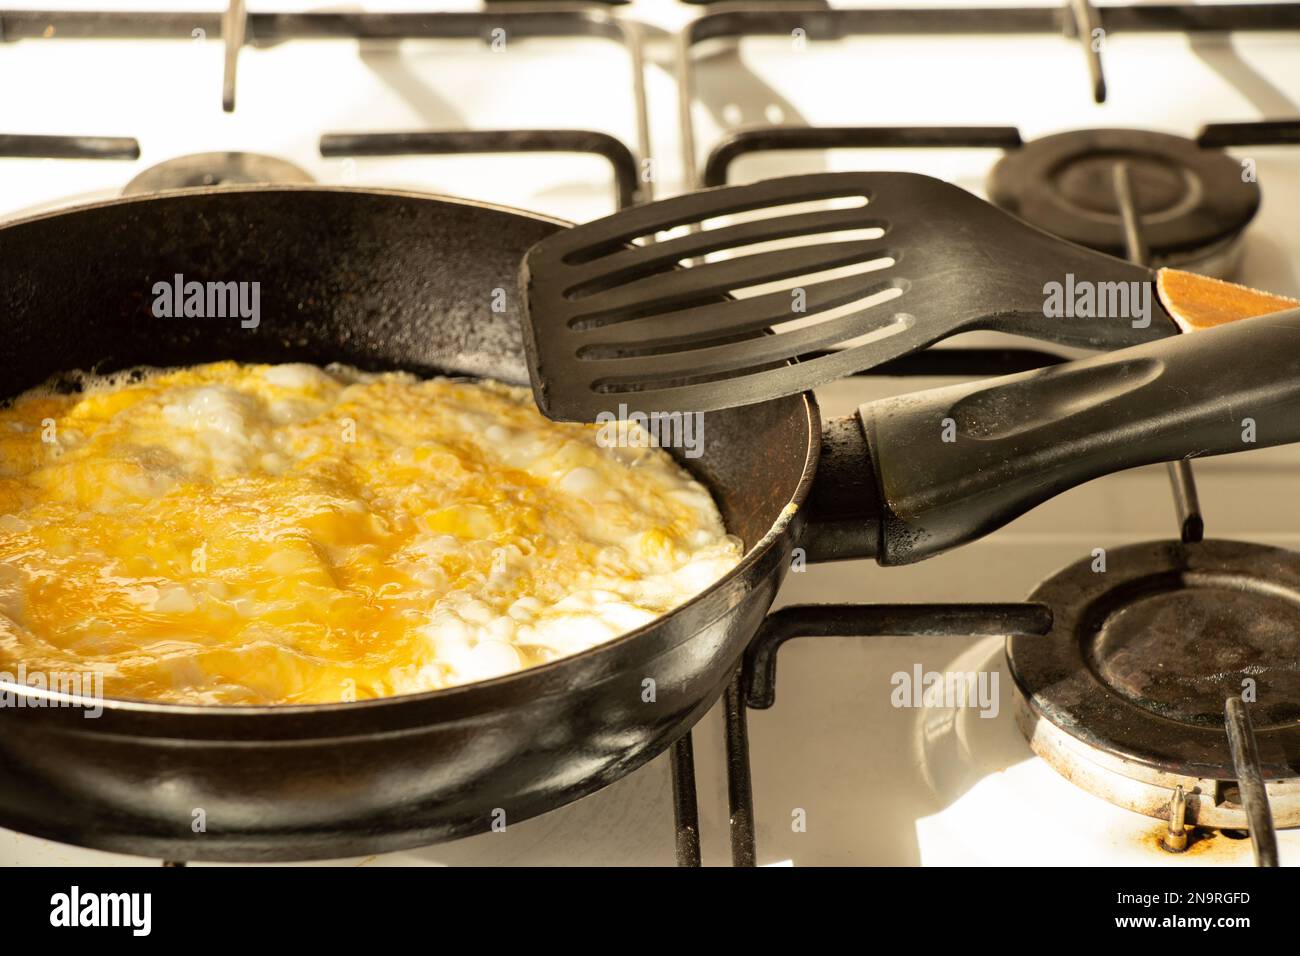 https://c8.alamy.com/comp/2N9RGFD/omelette-in-a-frying-pan-on-a-gas-stove-at-home-in-the-kitchen-cook-food-2N9RGFD.jpg